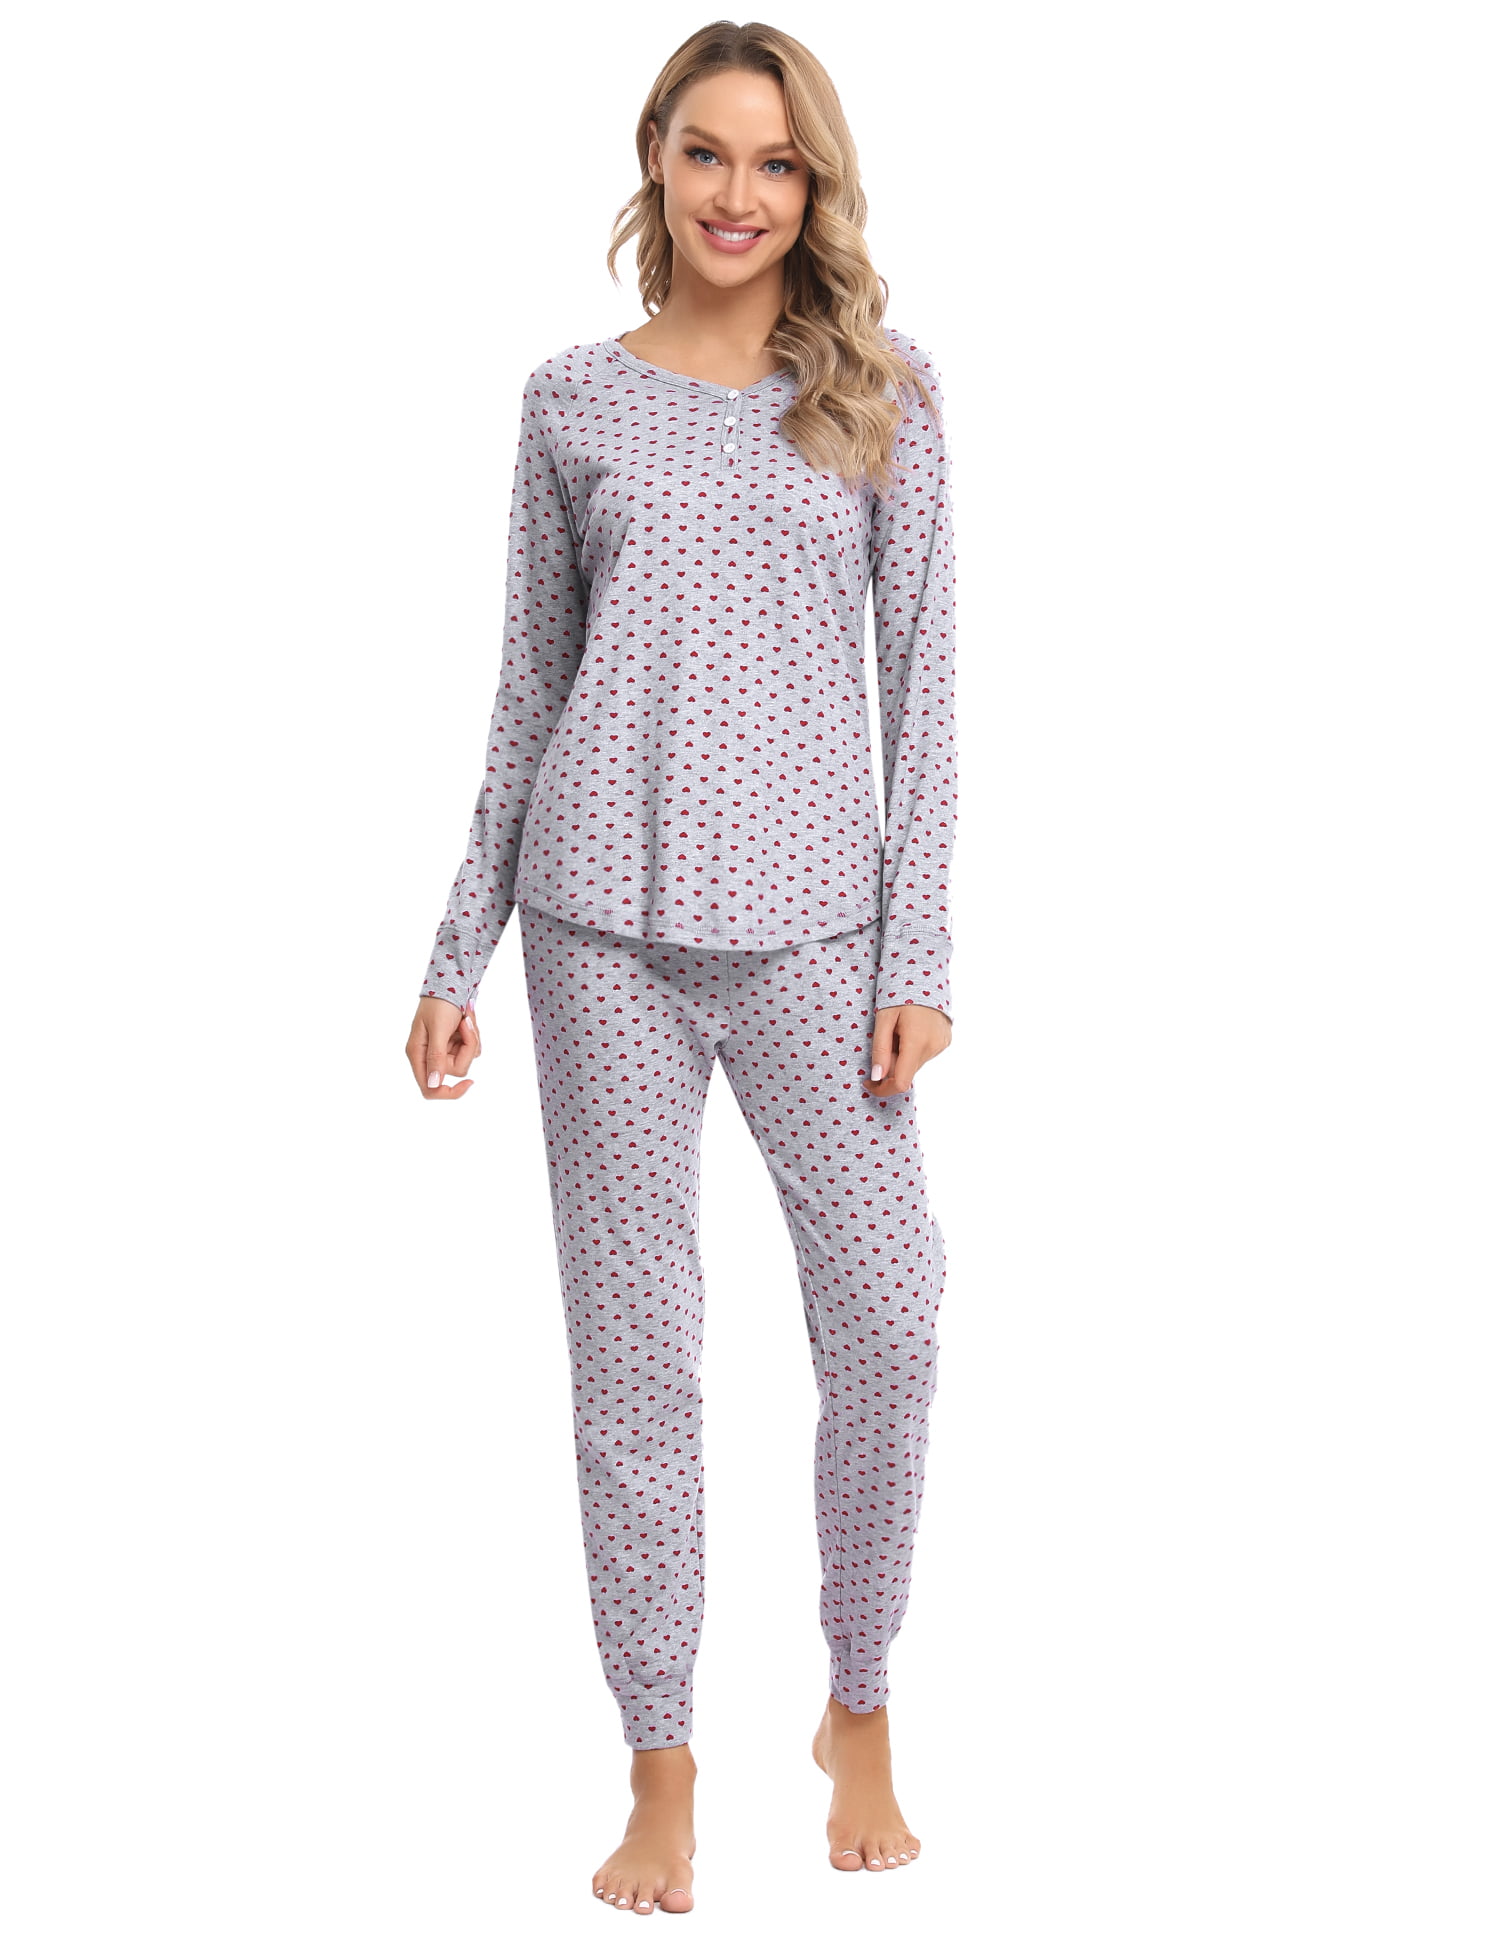 Hawiton Womens Long Sleeve Pajamas Set Cotton PJ Lounge Nightgowns with Pockets 